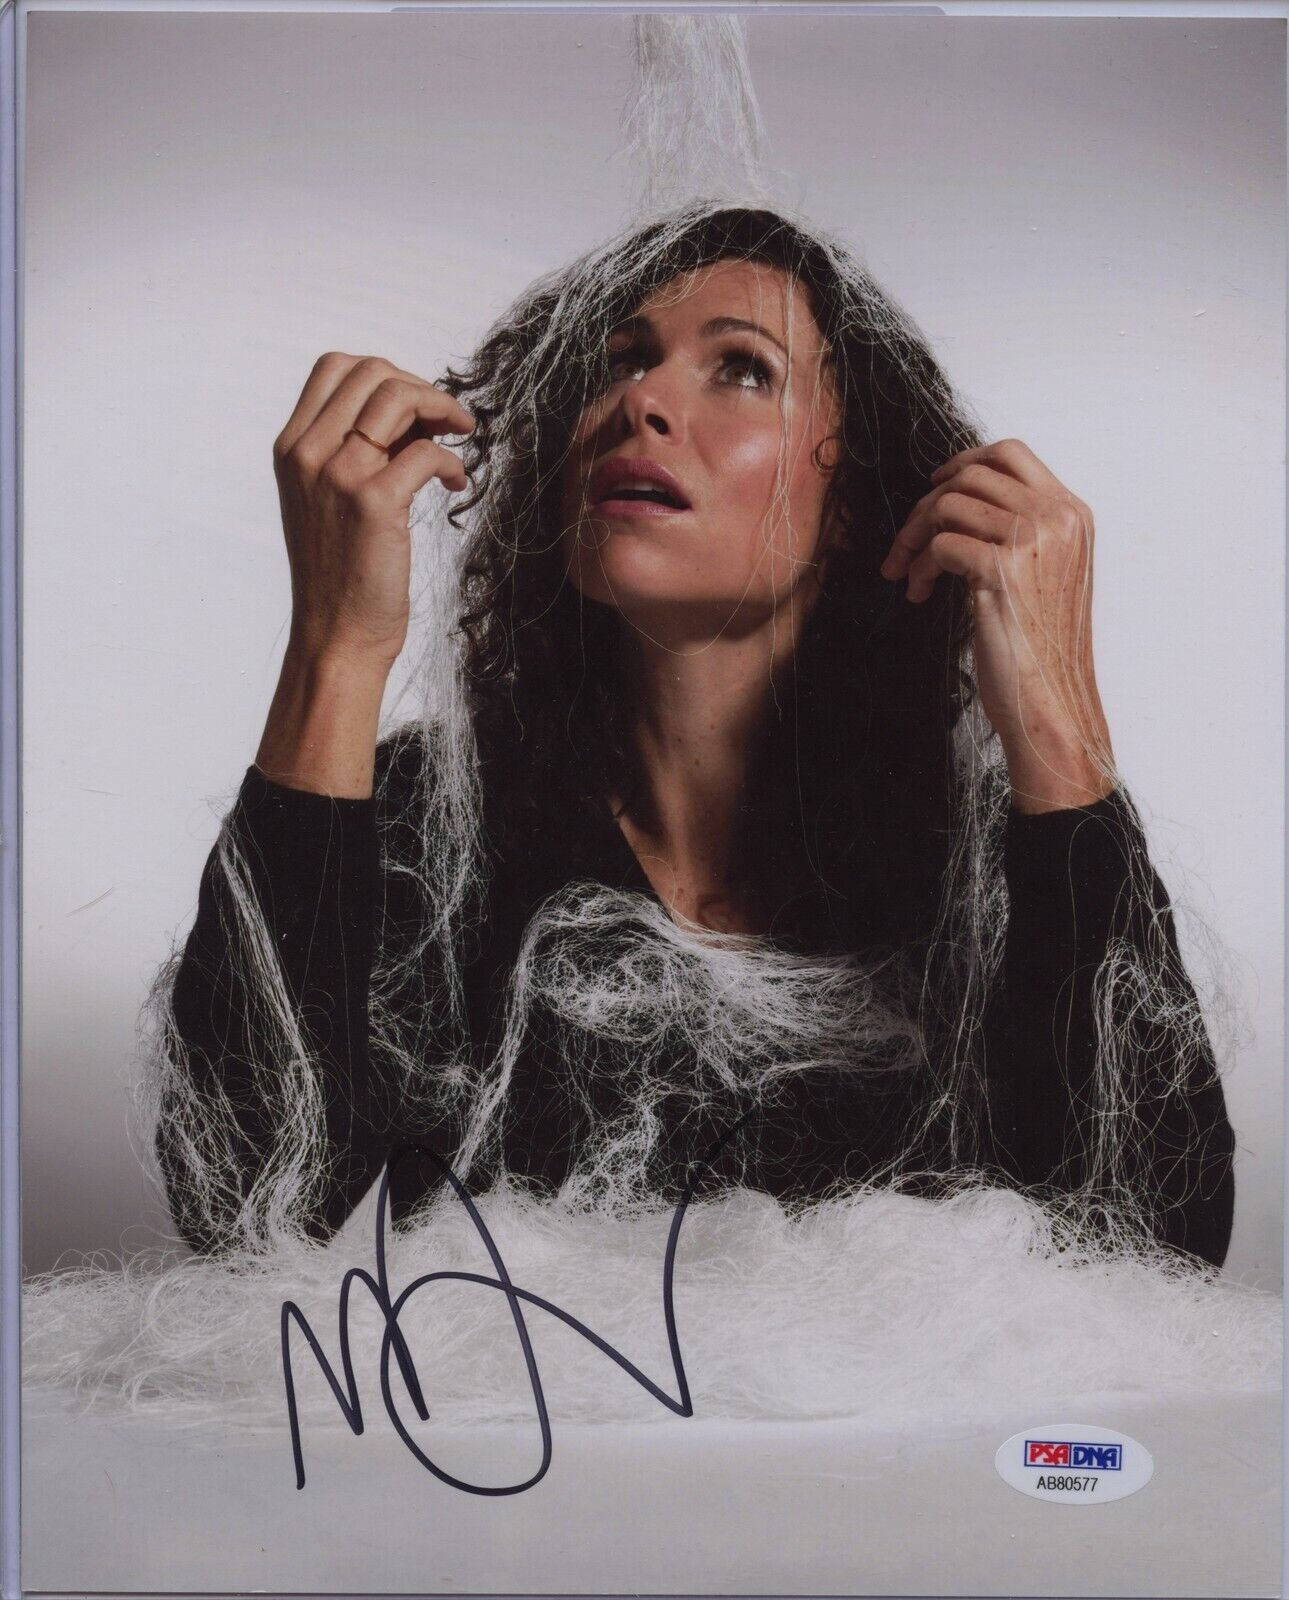 MINNIE DRIVER 8x10 Photo Poster painting Signed Autographed Auto PSA DNA COA Good Will Hunting